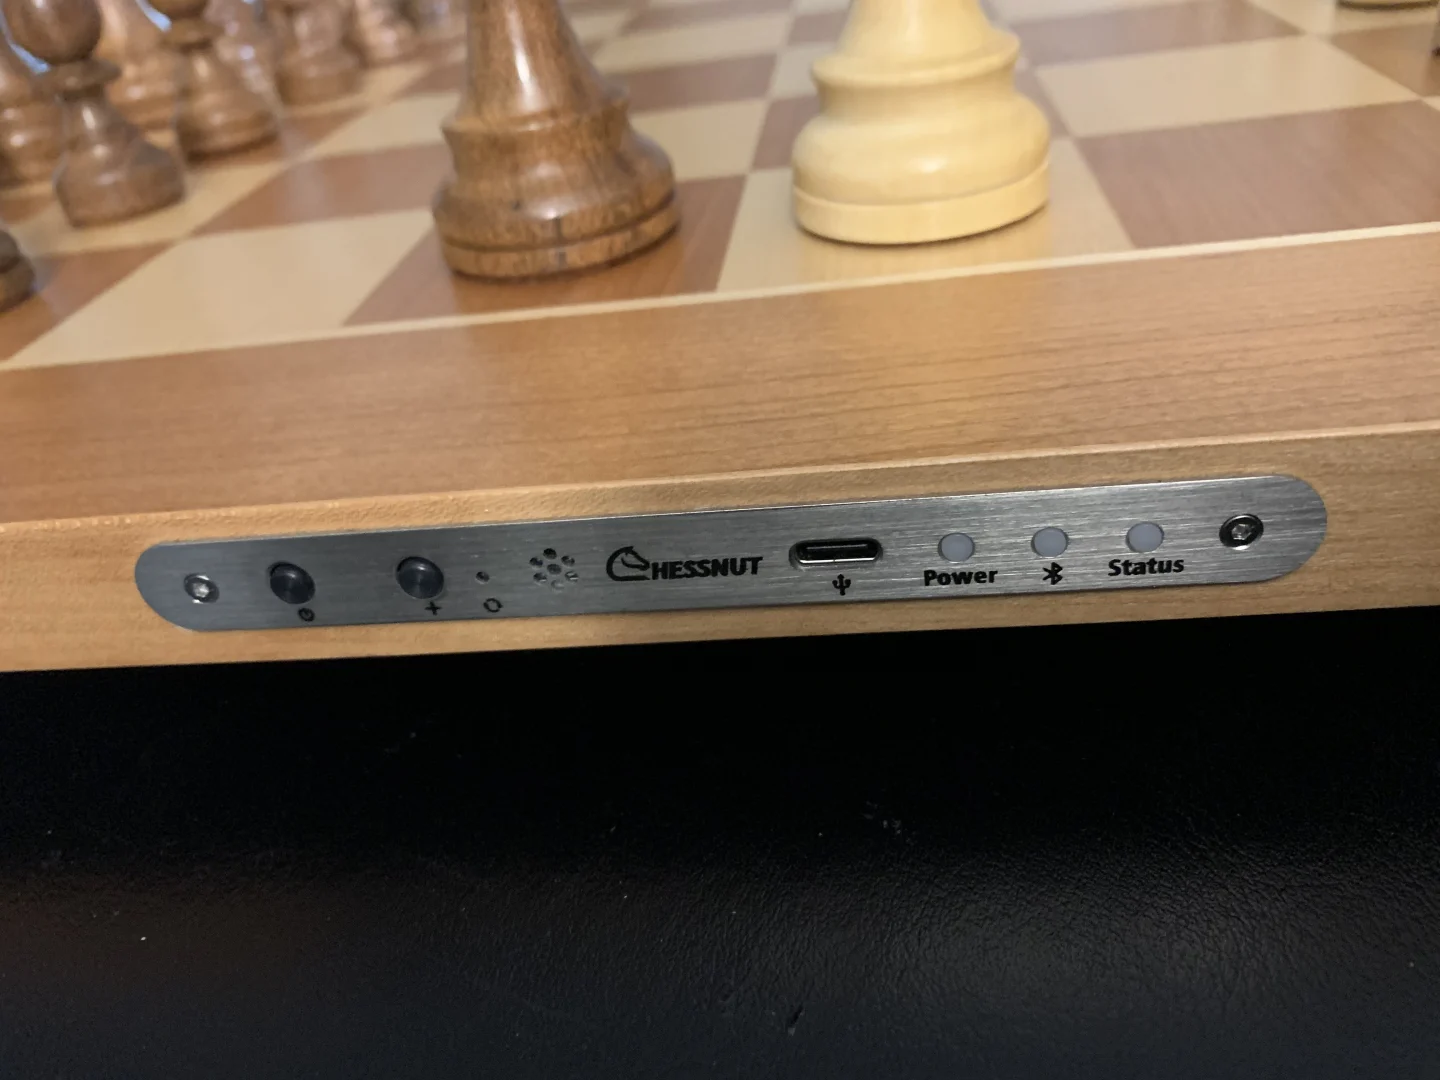 Millennium Chess Computer - The King Competition – Chess House